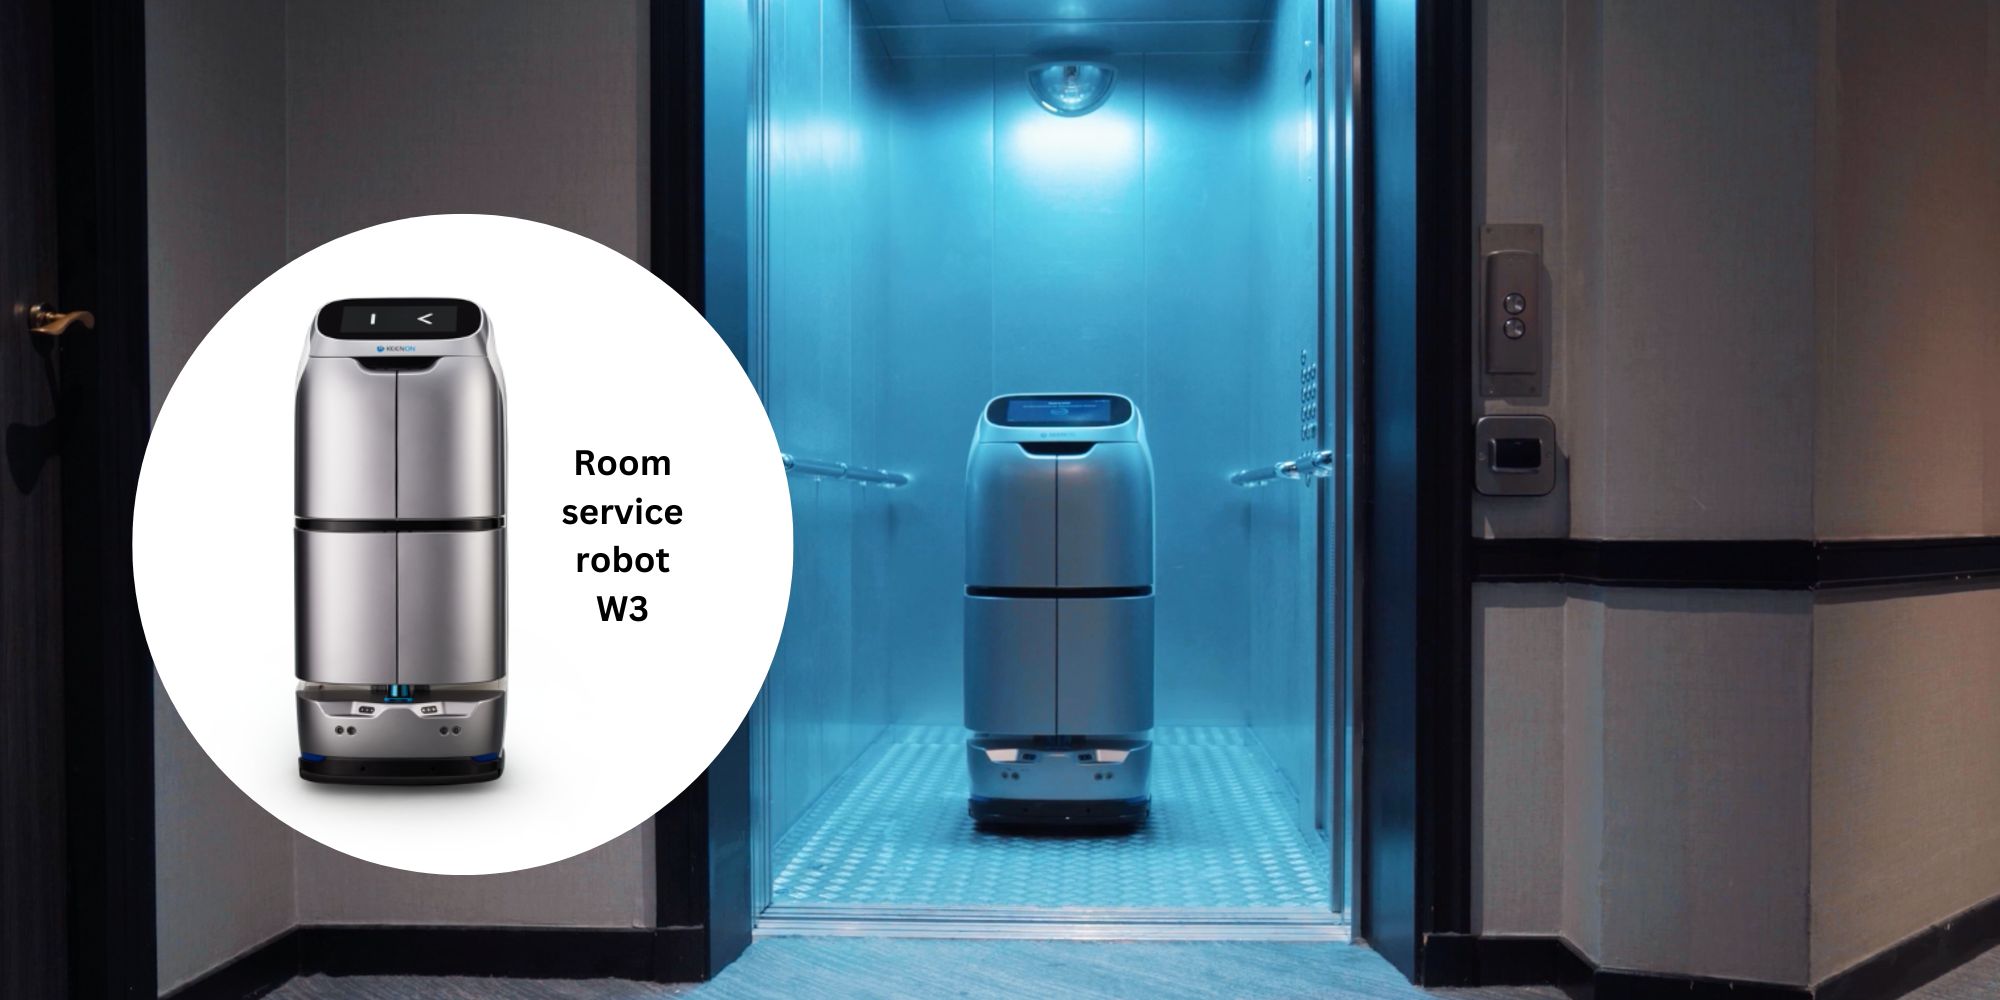 Want to Stand Out From the Crowd With Your Hotel Tech? You Need a Robot For That